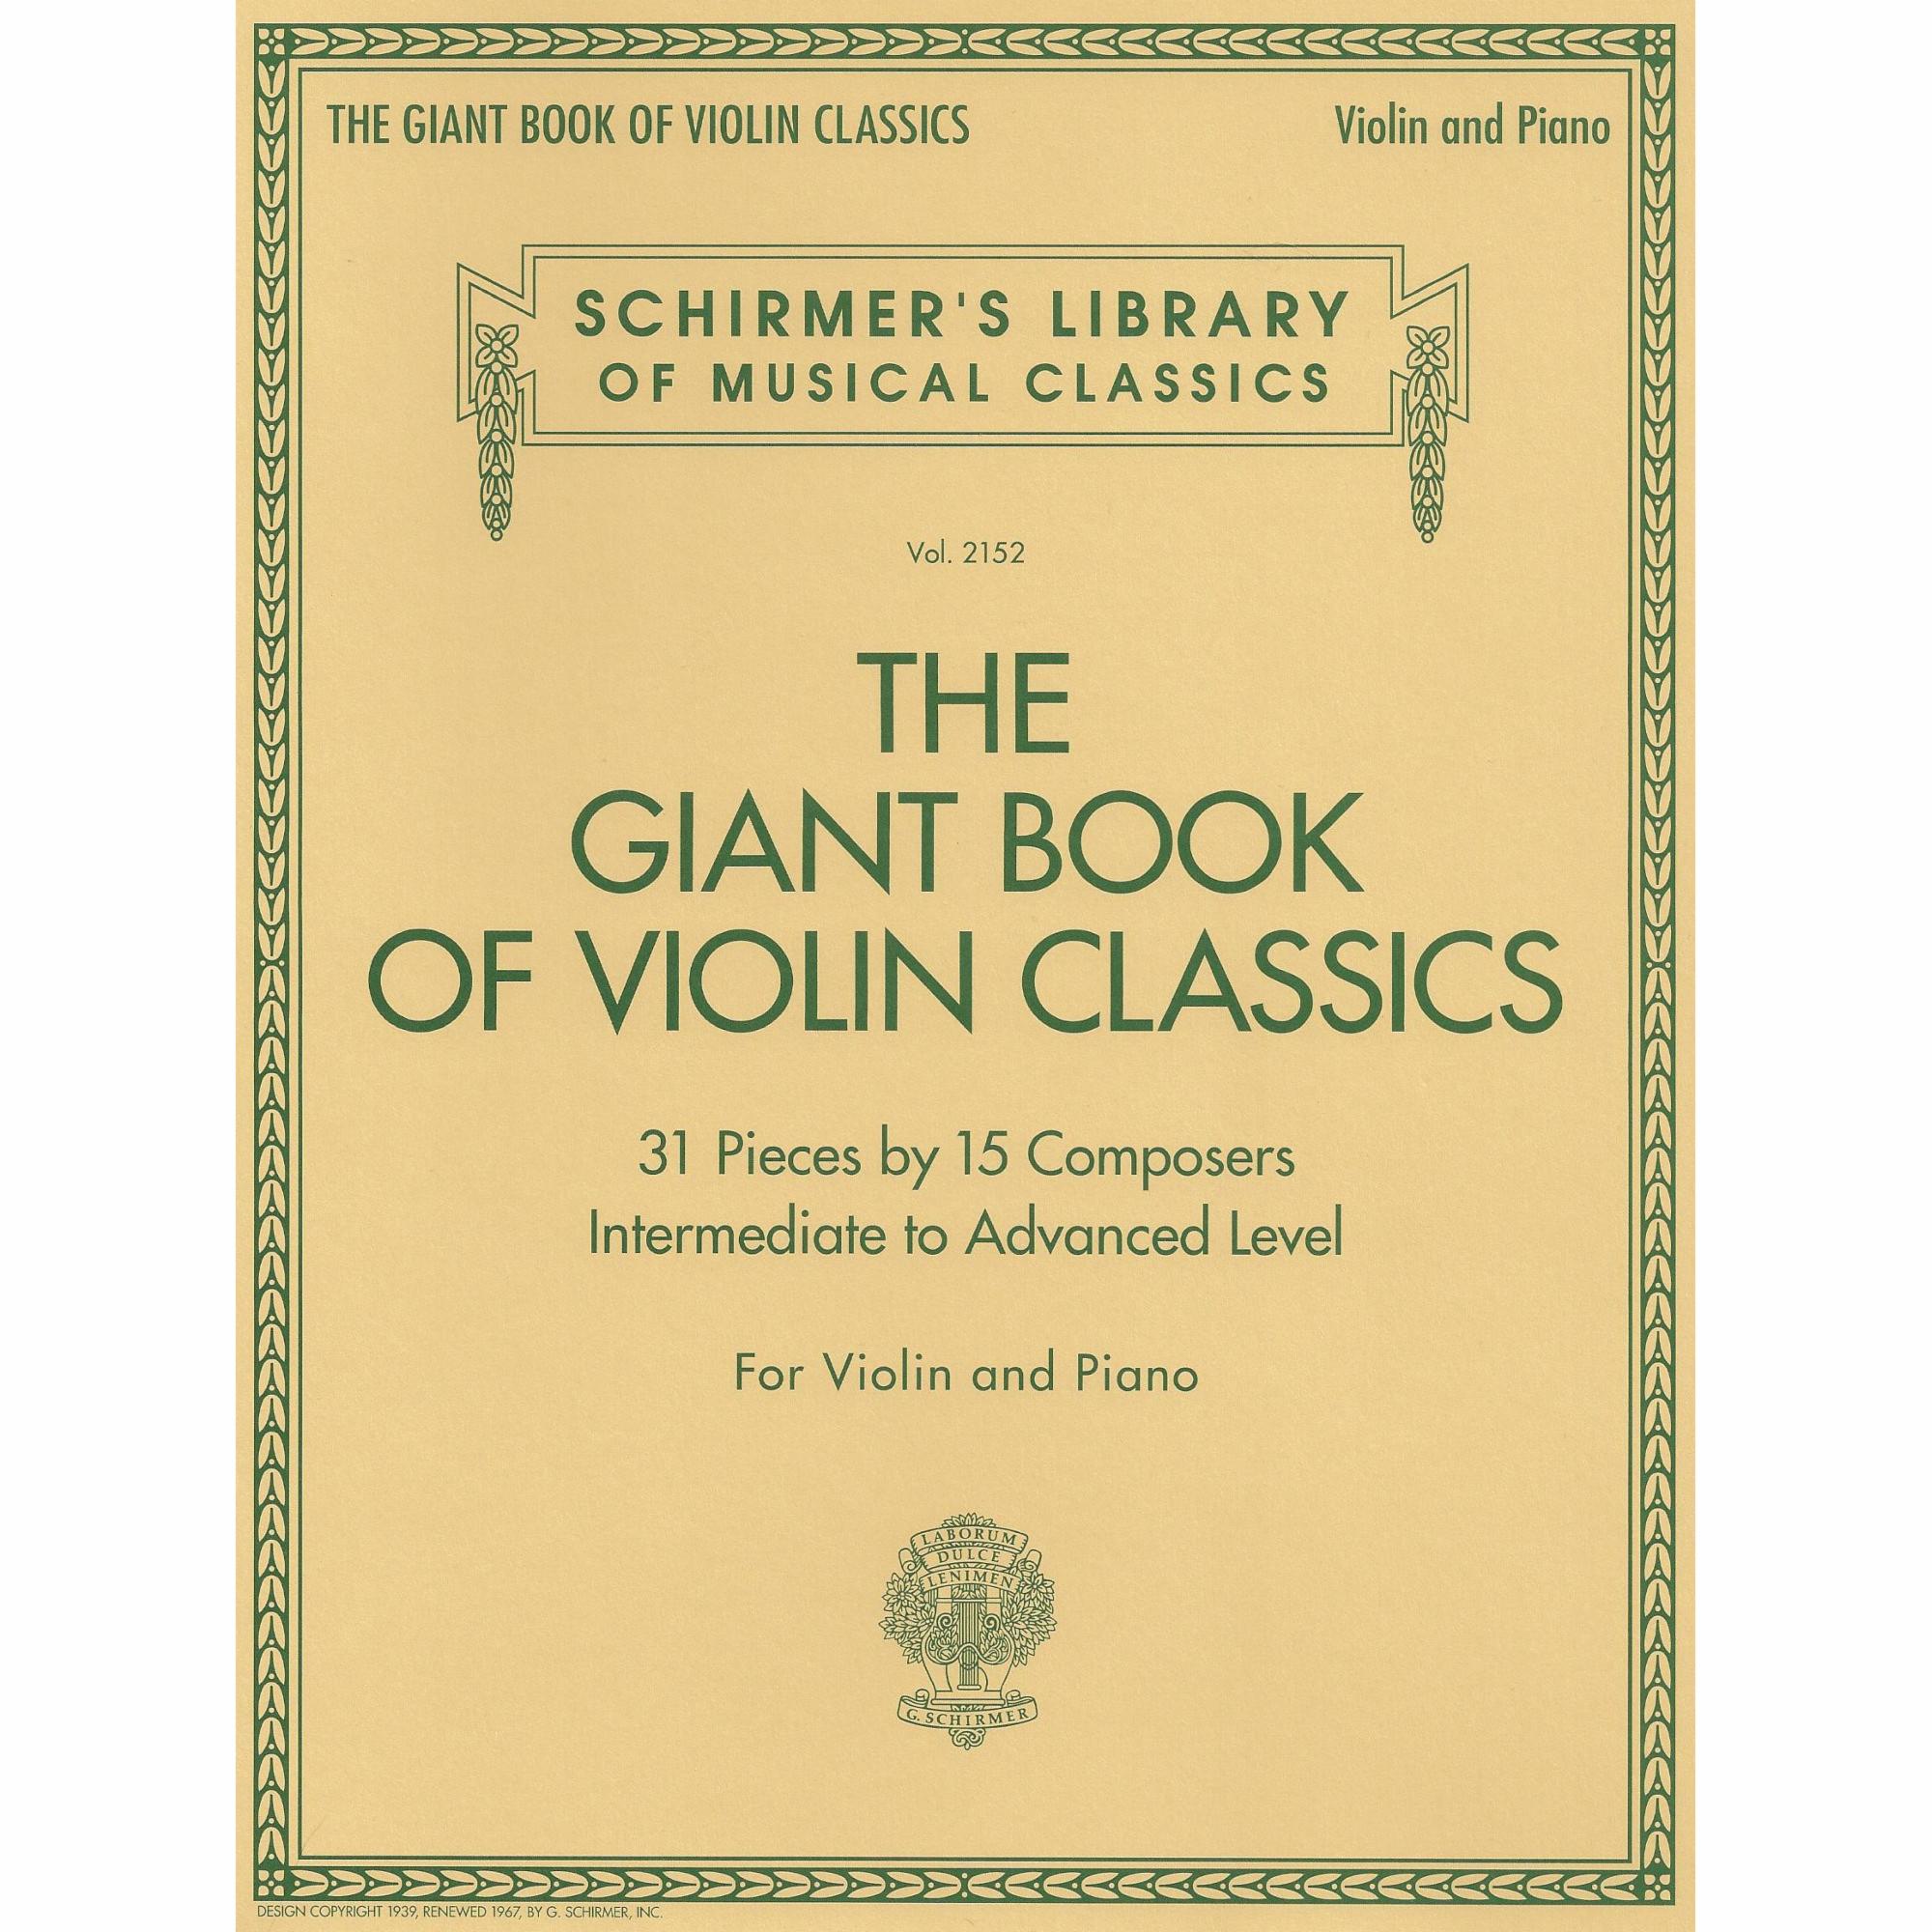 The Giant Book of Violin Classics for Violin and Piano